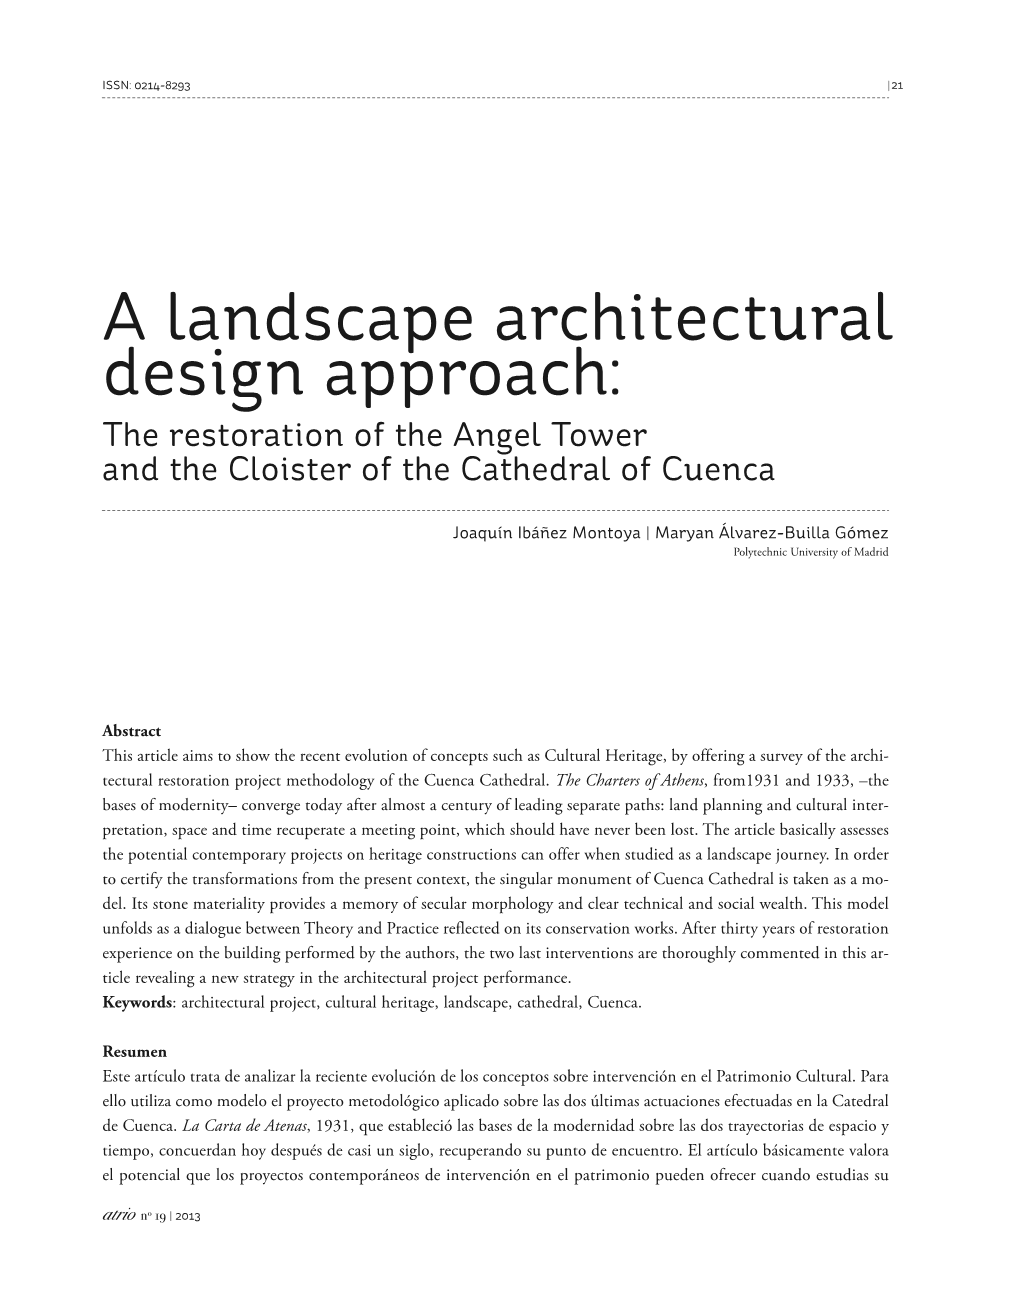 A Landscape Architectural Design Approach: the Restoration of the Angel Tower and the Cloister of the Cathedral of Cuenca